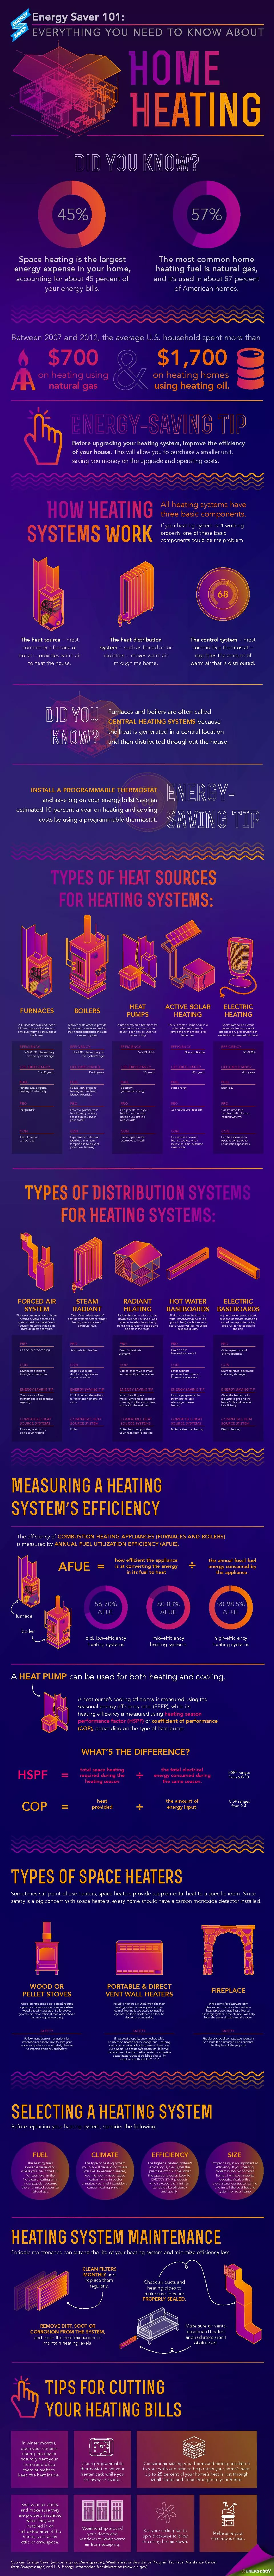 Furnaces and boilers are often called CENTRAL HEATING SYSTEMS and then